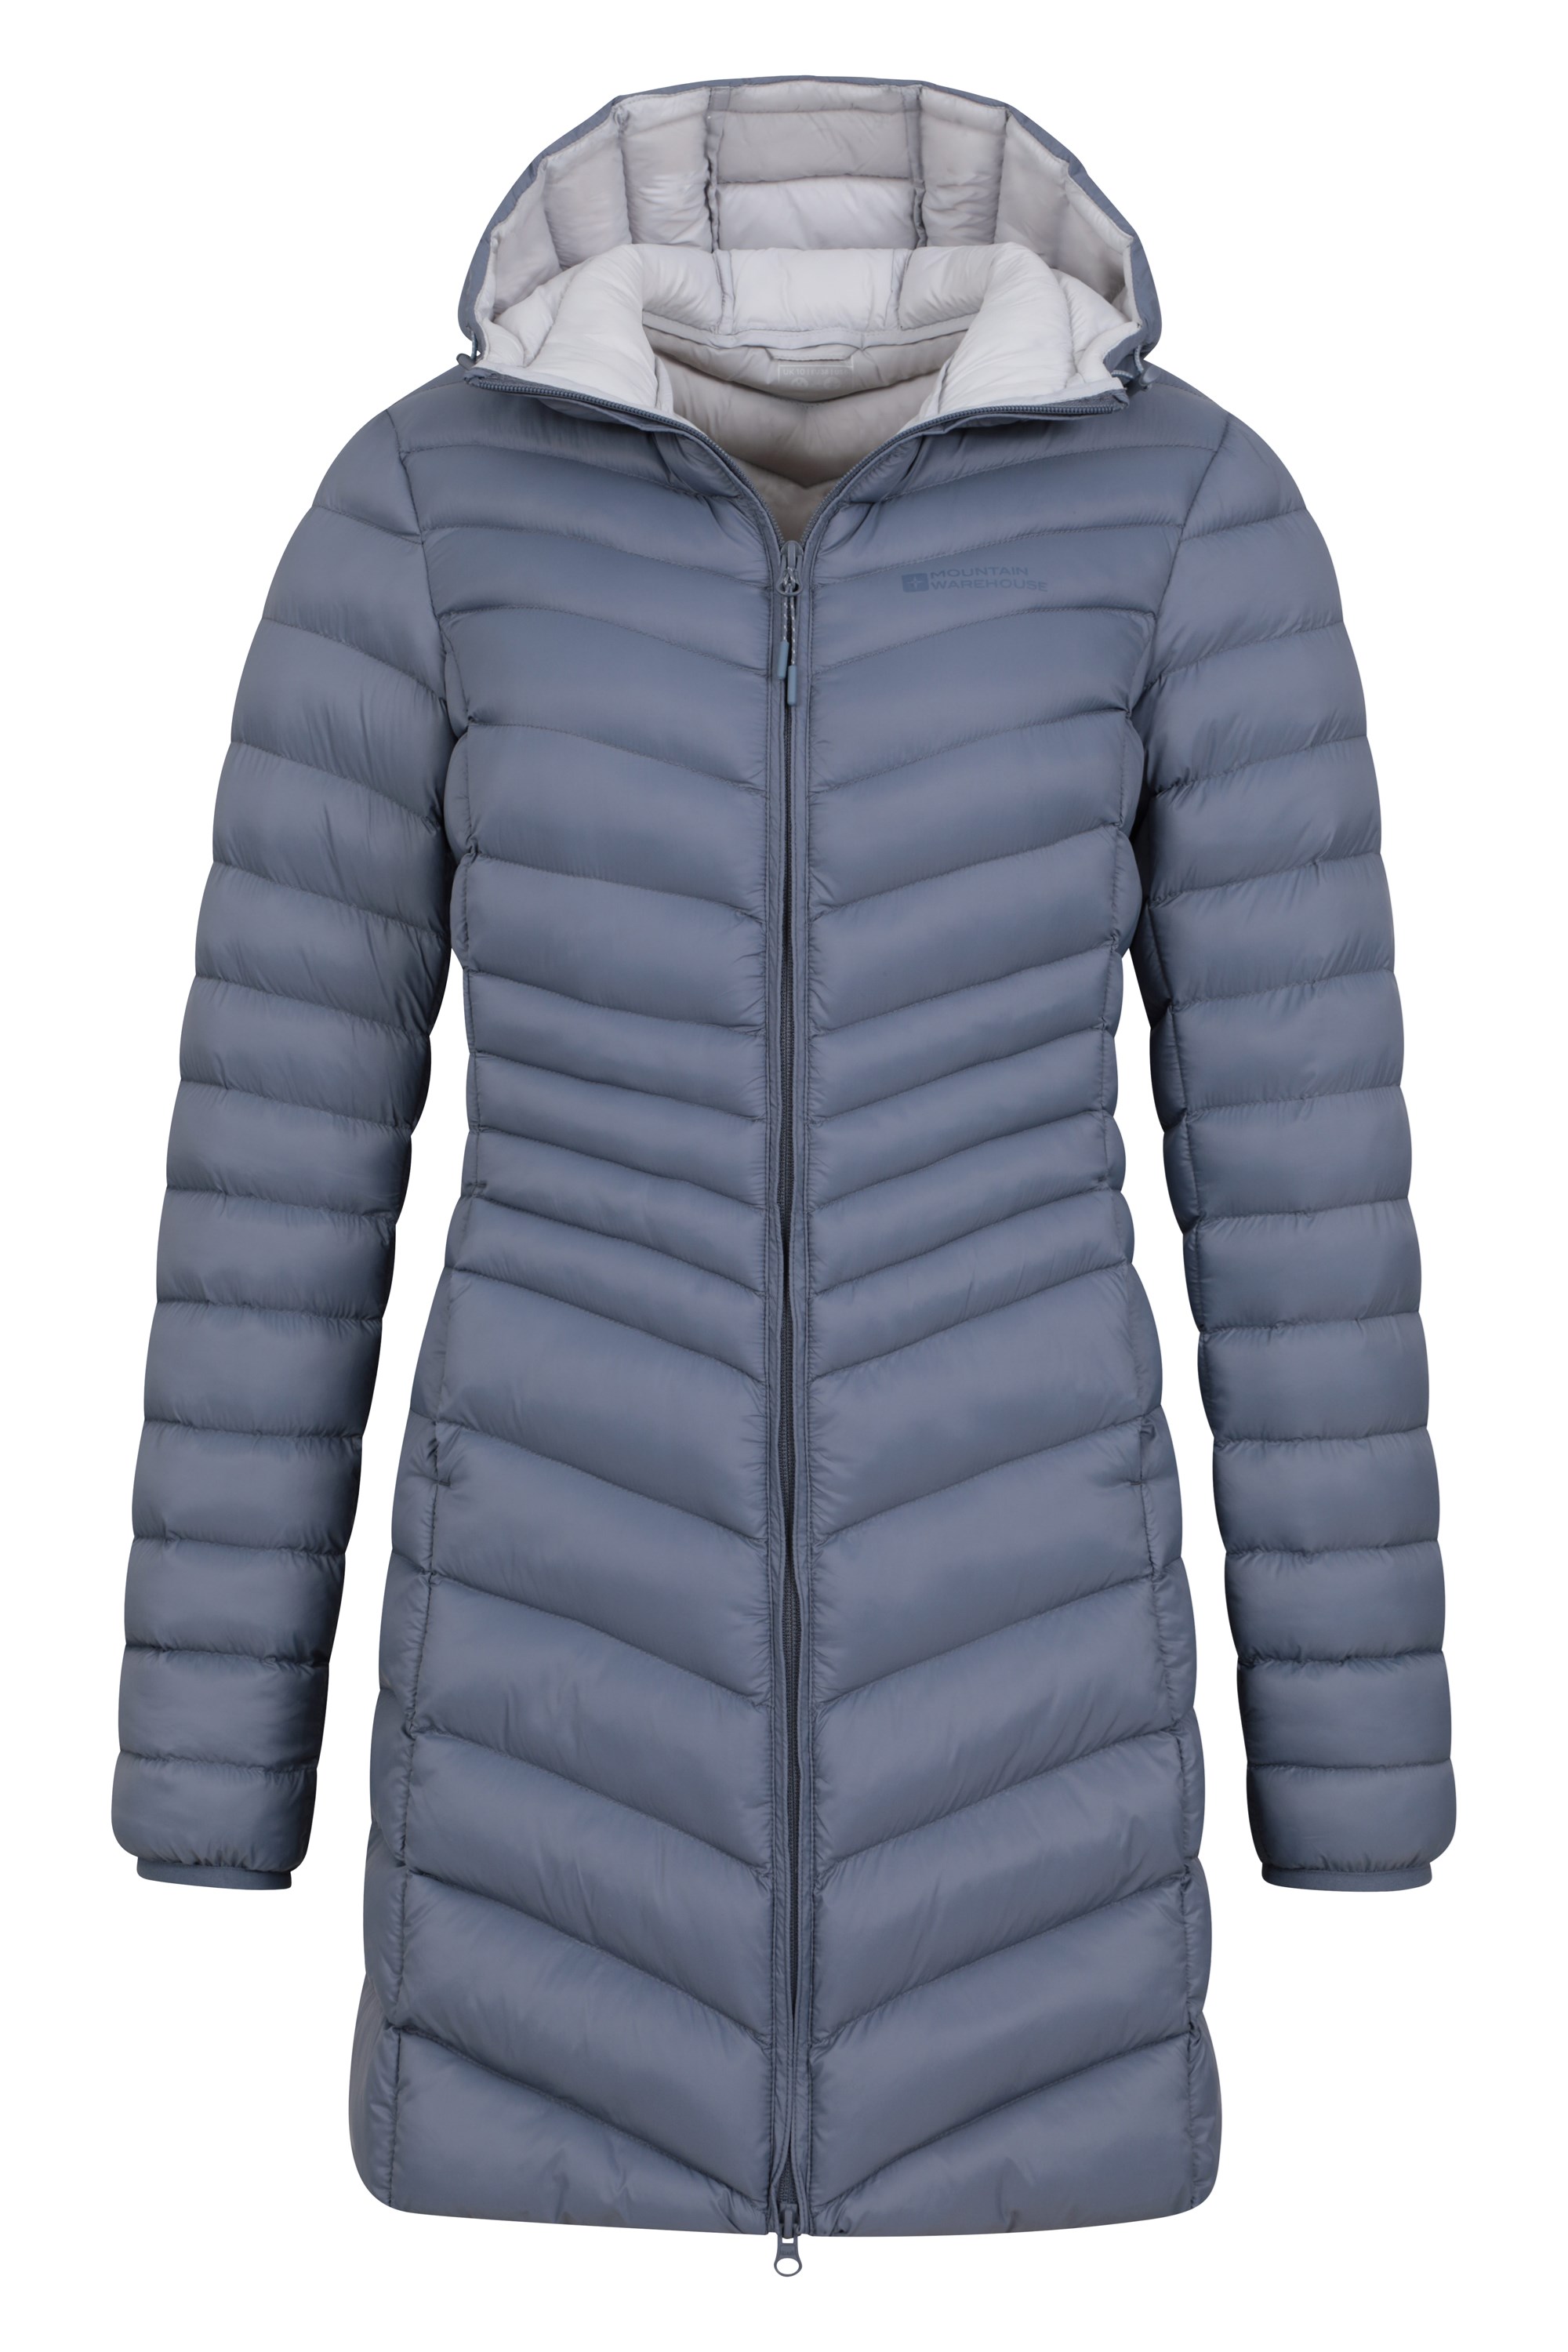 Florence Womens Long Insulated Jacket